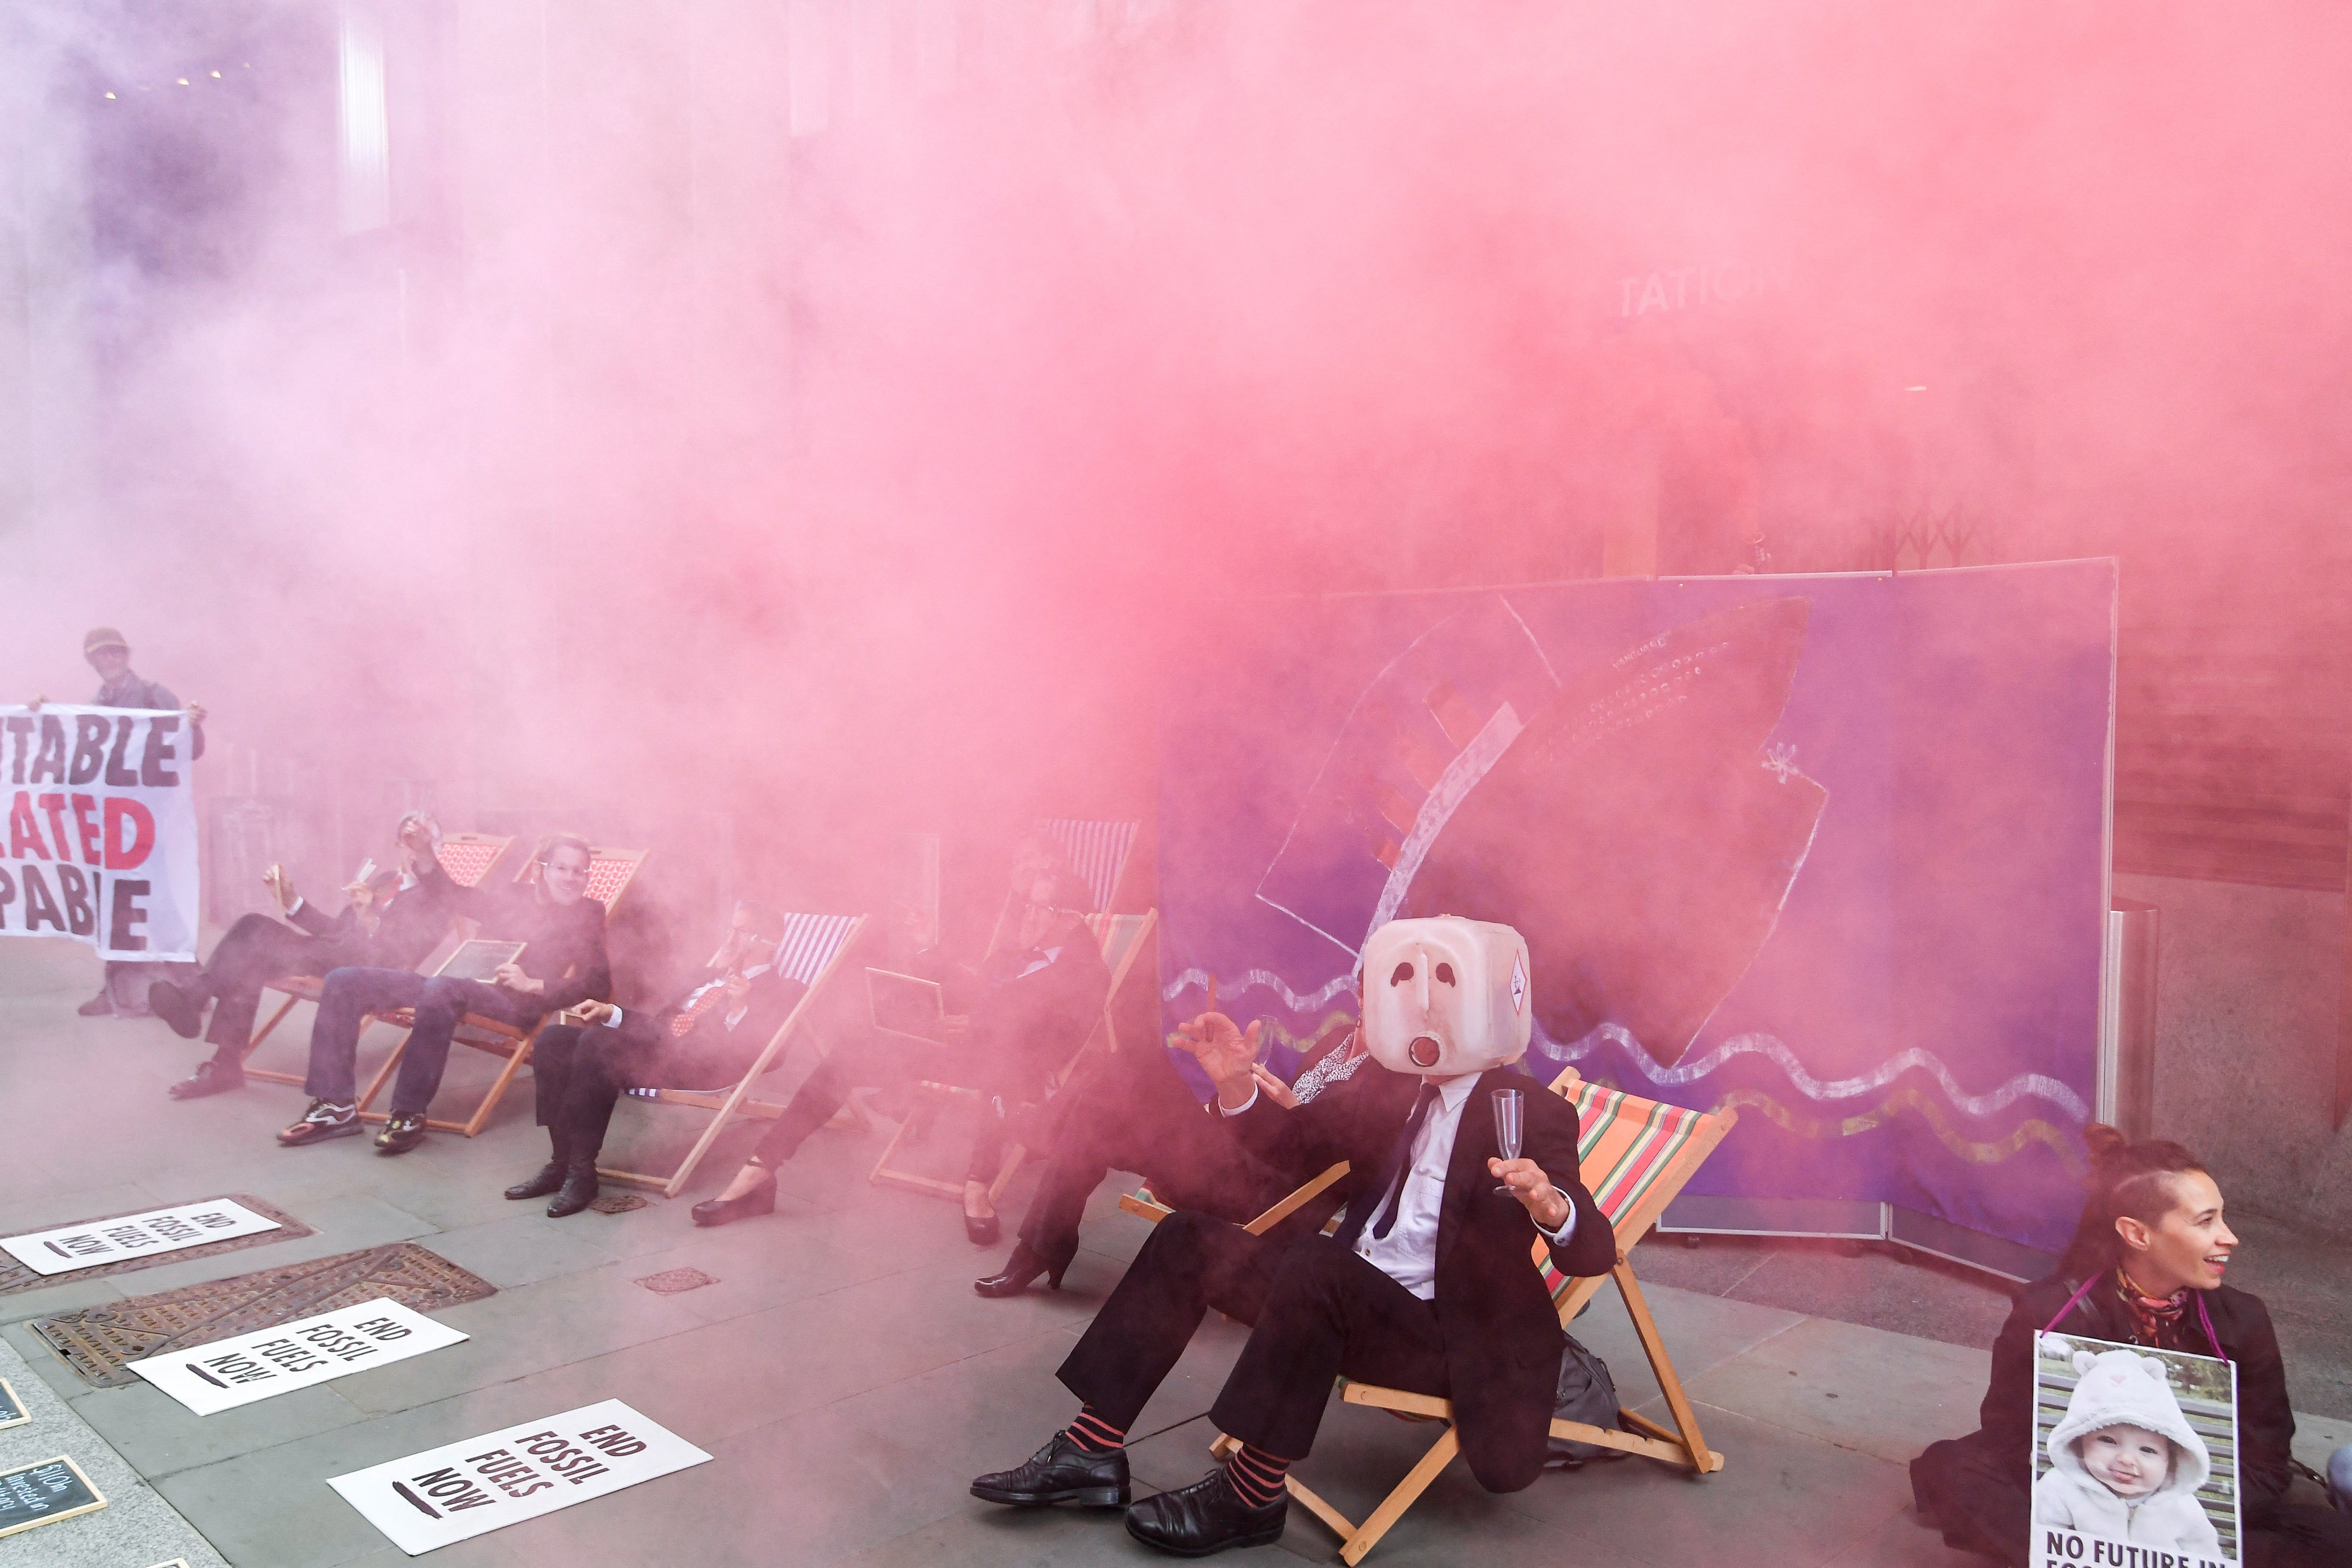 Pink smoke billows over members of Extinction Rebellion staging a protest against the use of and investment in fossil fuel, outside offices of Vanguard Asset Management on Earth Day